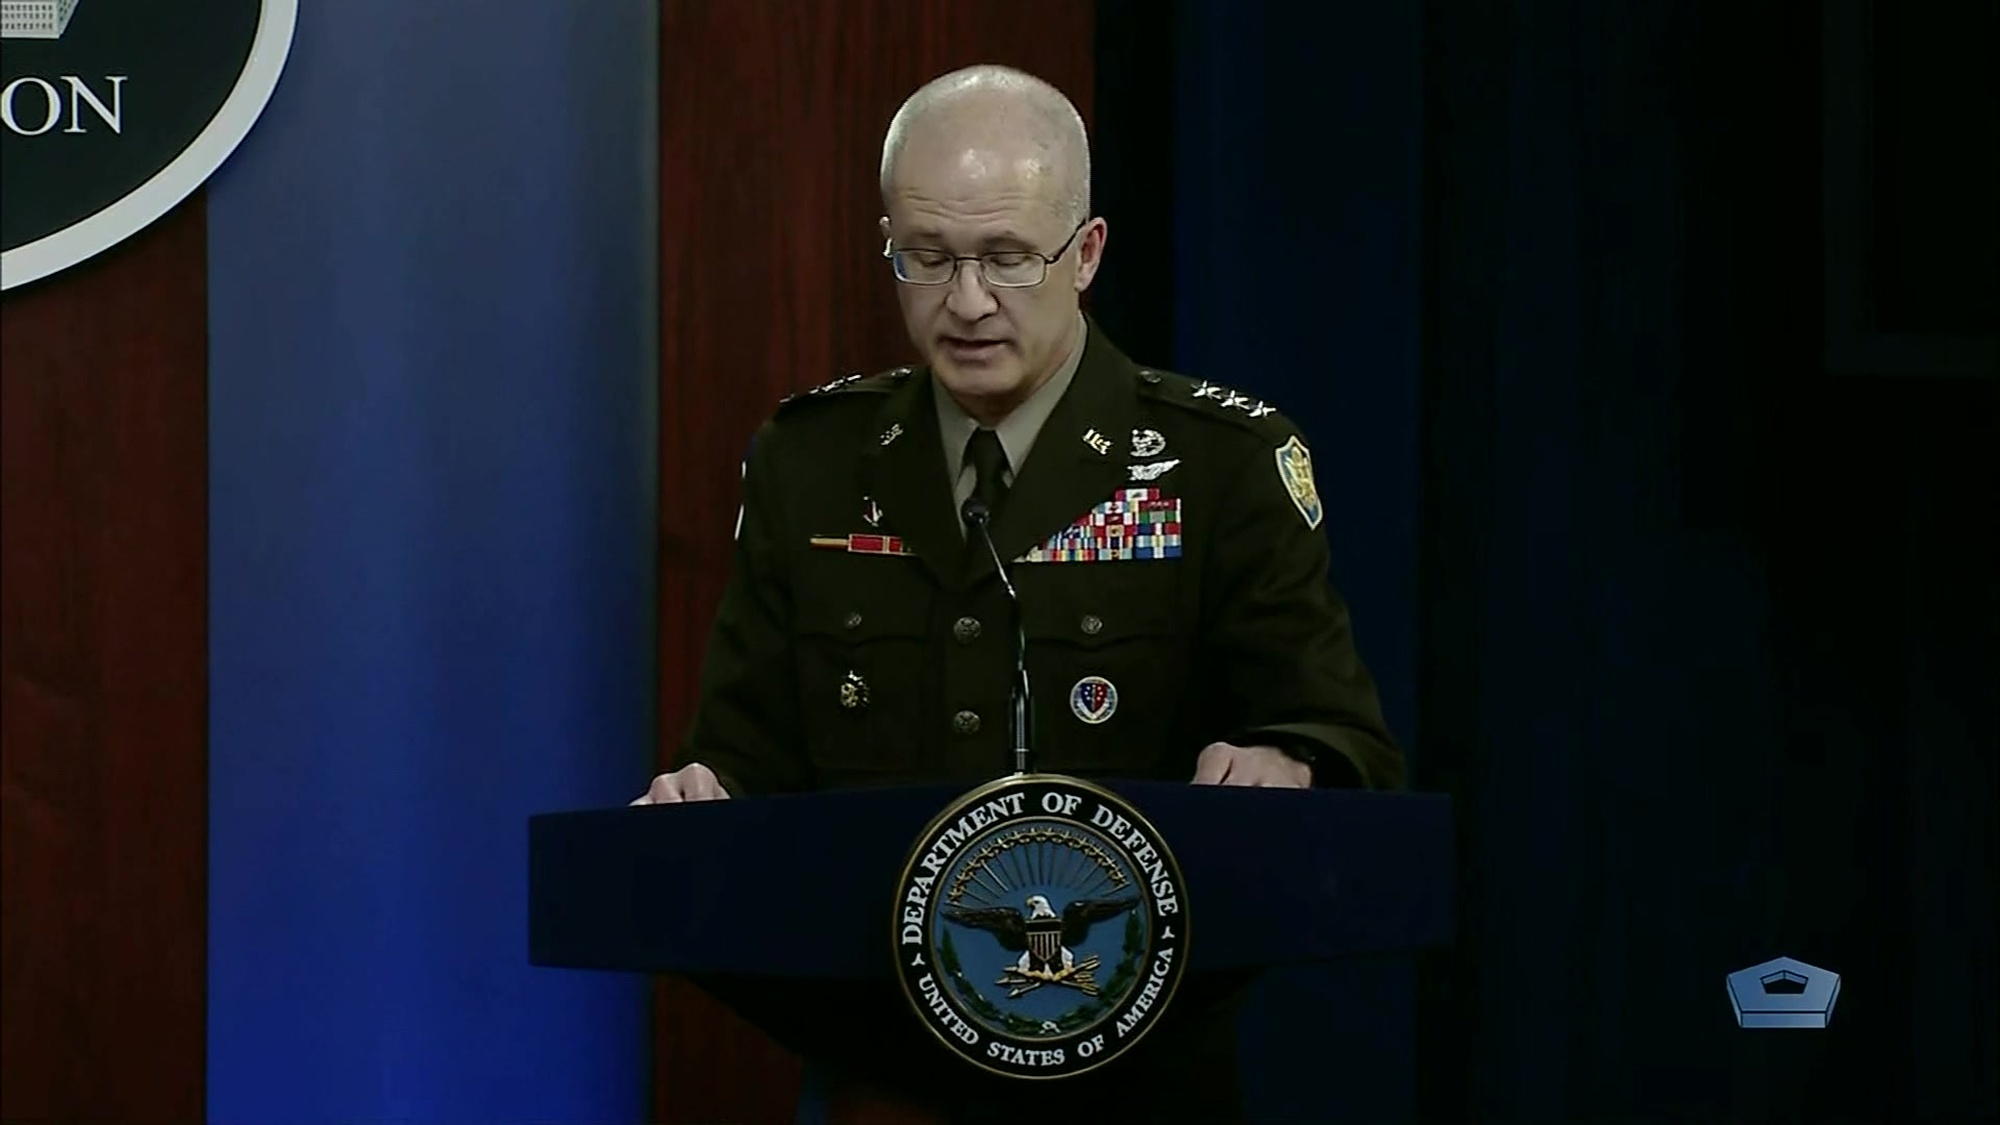 A military official speaks at a lectern.